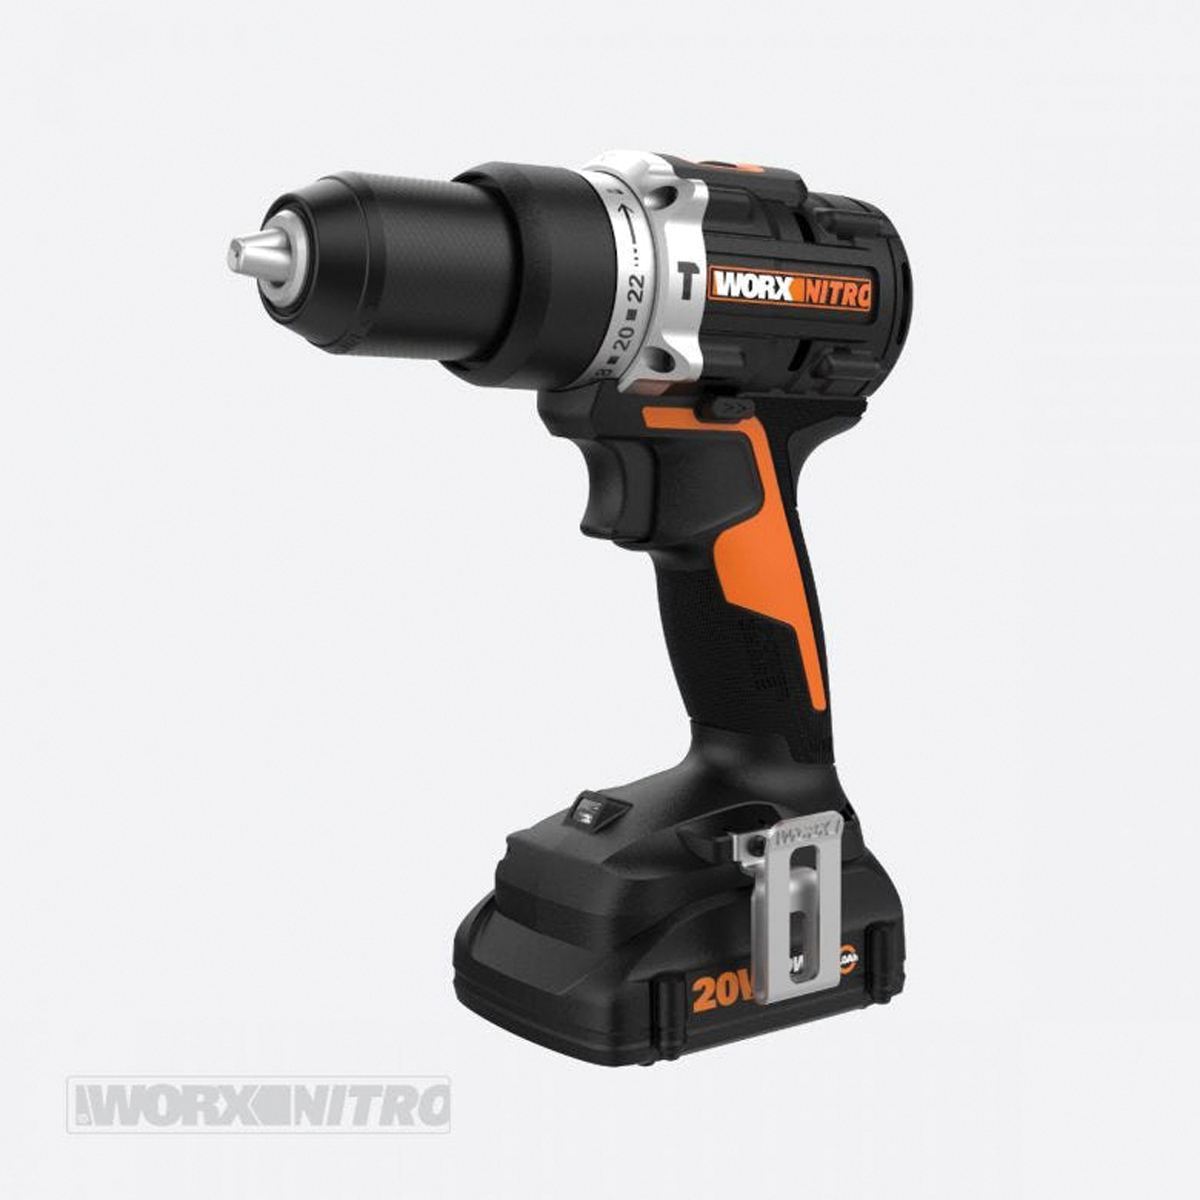 Nitro WX352L Cordless Hammer Drill, Battery Included, 20 V, 2 Ah, 1/2 in Chuck, Ratcheting Chuck